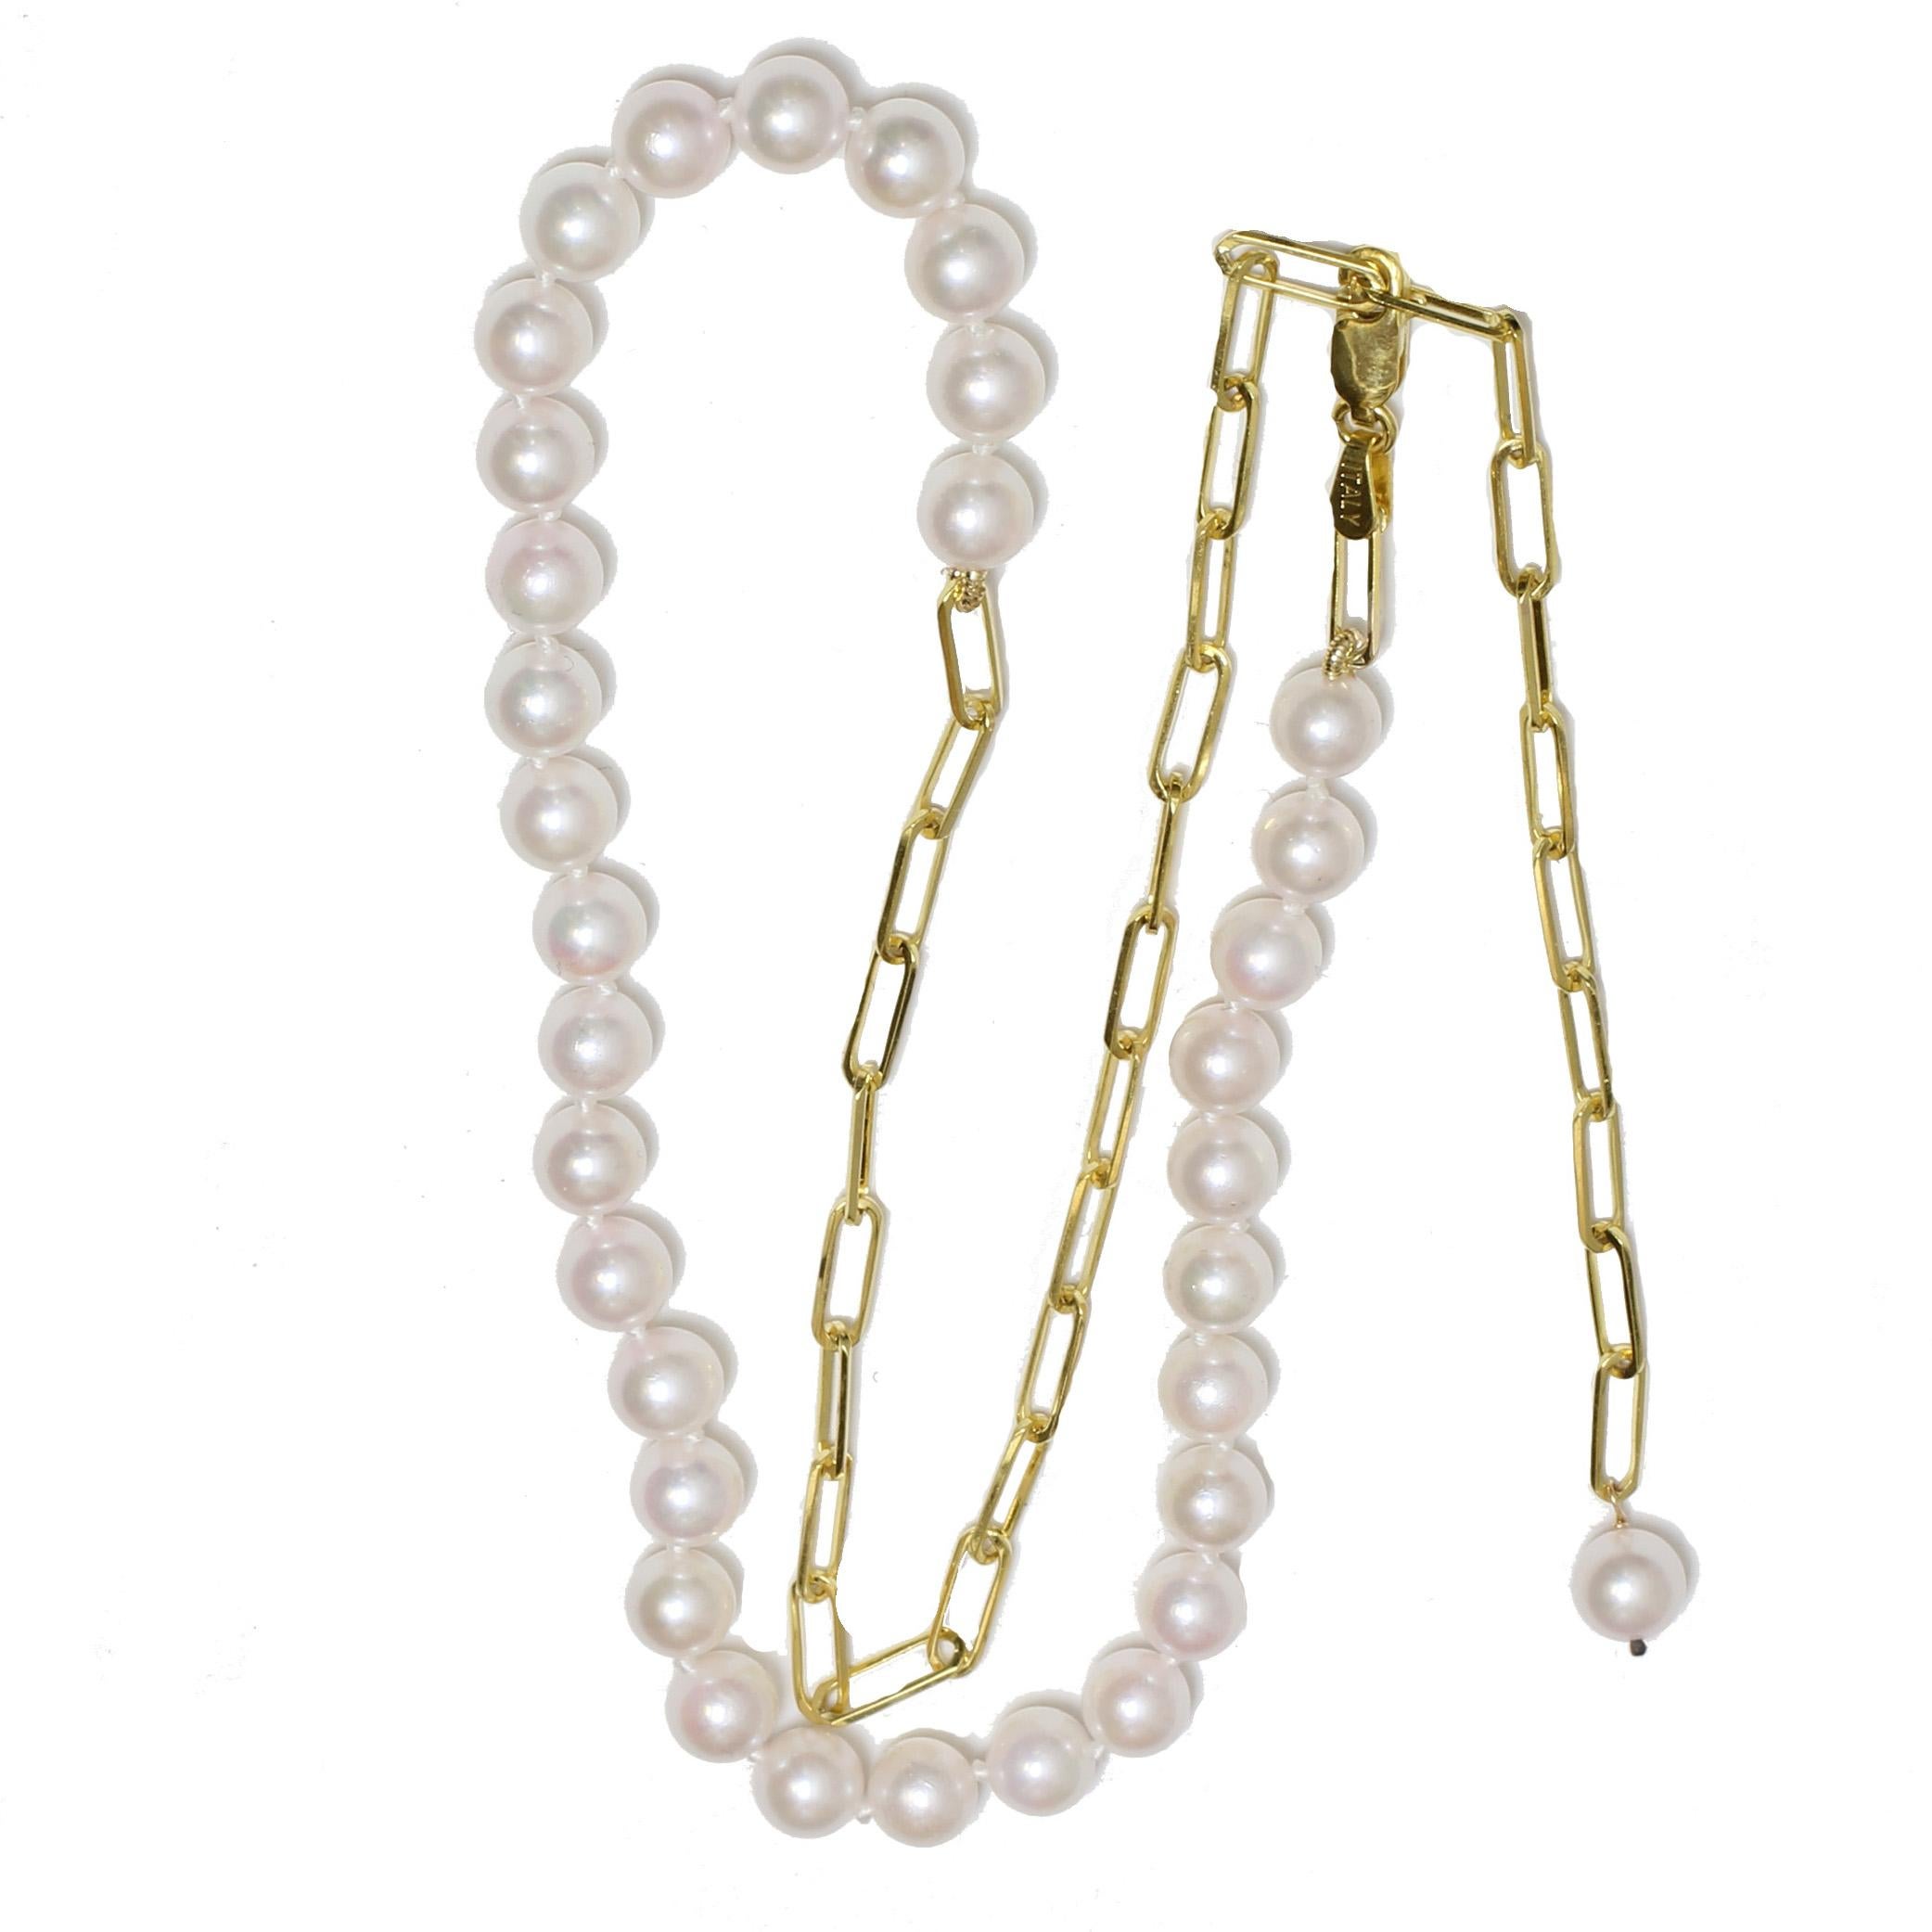 This cultured Japanese round 6 - 6.5 AAA akoya pearl and 14k yellow gold paper clip necklace. The Necklace is so beautiful it has a twist between modern and classic. The total length of the necklace is 18